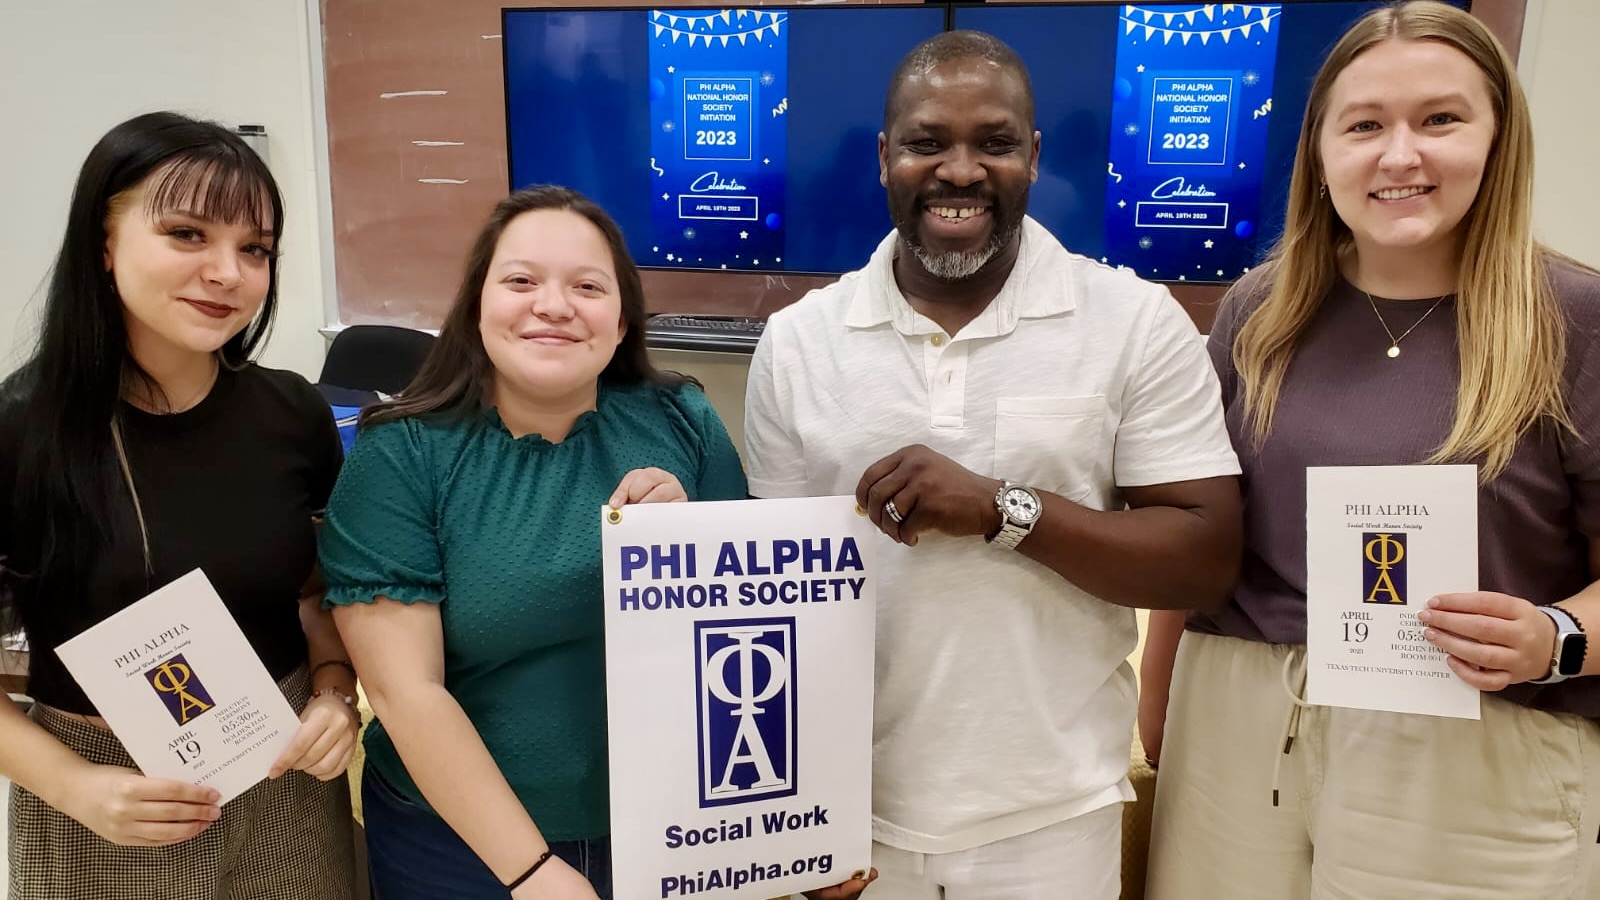 4 students pictured with "Phi Alpa Honor Society" poster